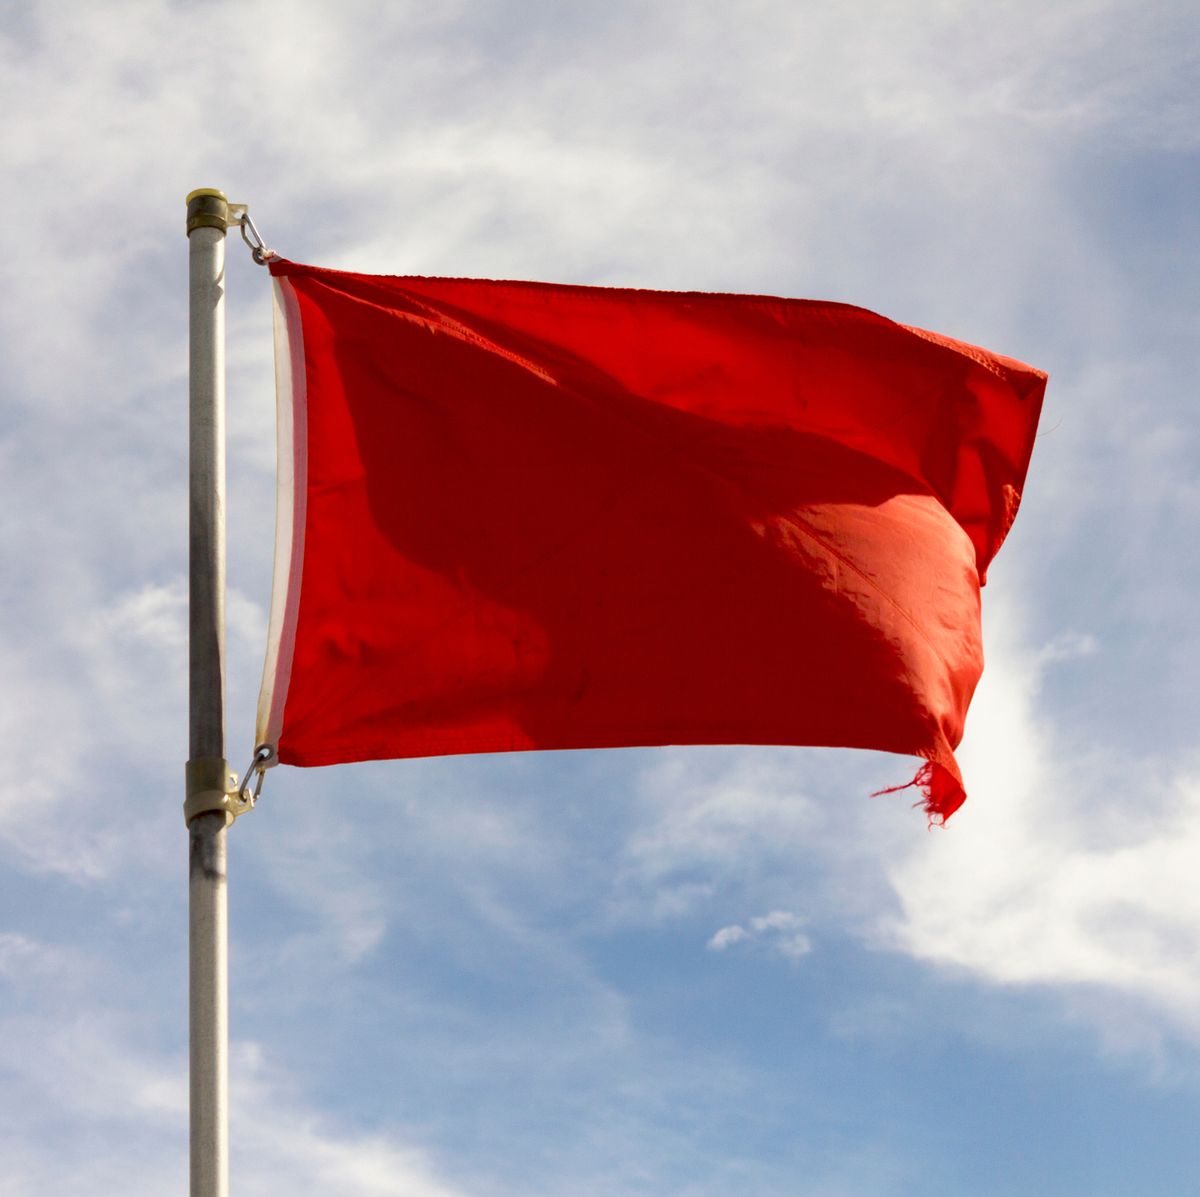 15 Big Relationship Red Flags - Breakup Warning Signs